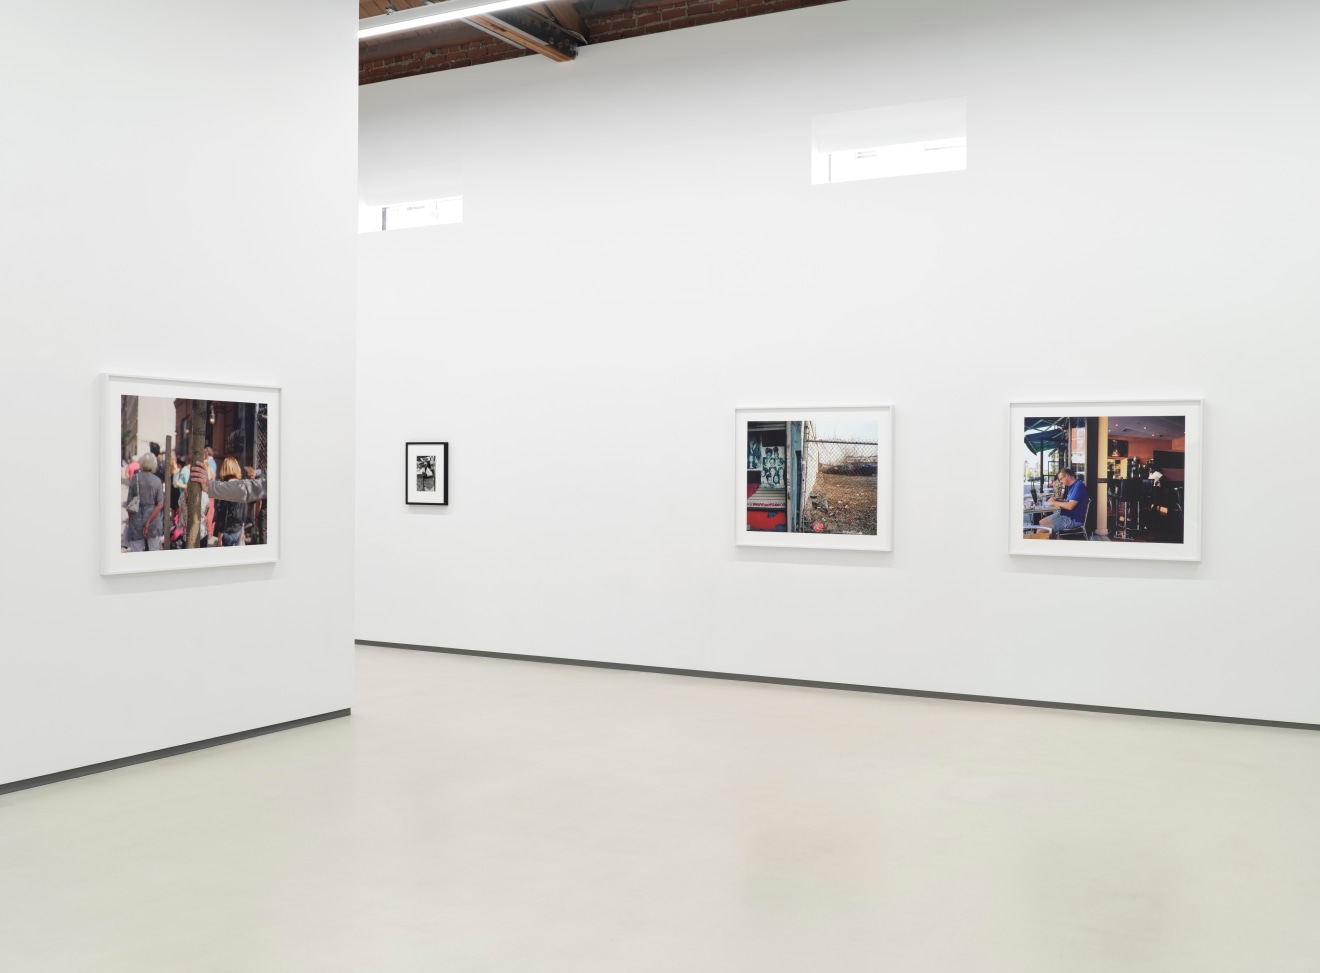 Installation view of&nbsp;Dawoud Bey: Pictures 1976 - 2019&nbsp;at Sean Kelly, Los Angeles, April 29&ndash;June 30, Photography: Brica Wilcox, Courtesy: Sean Kelly